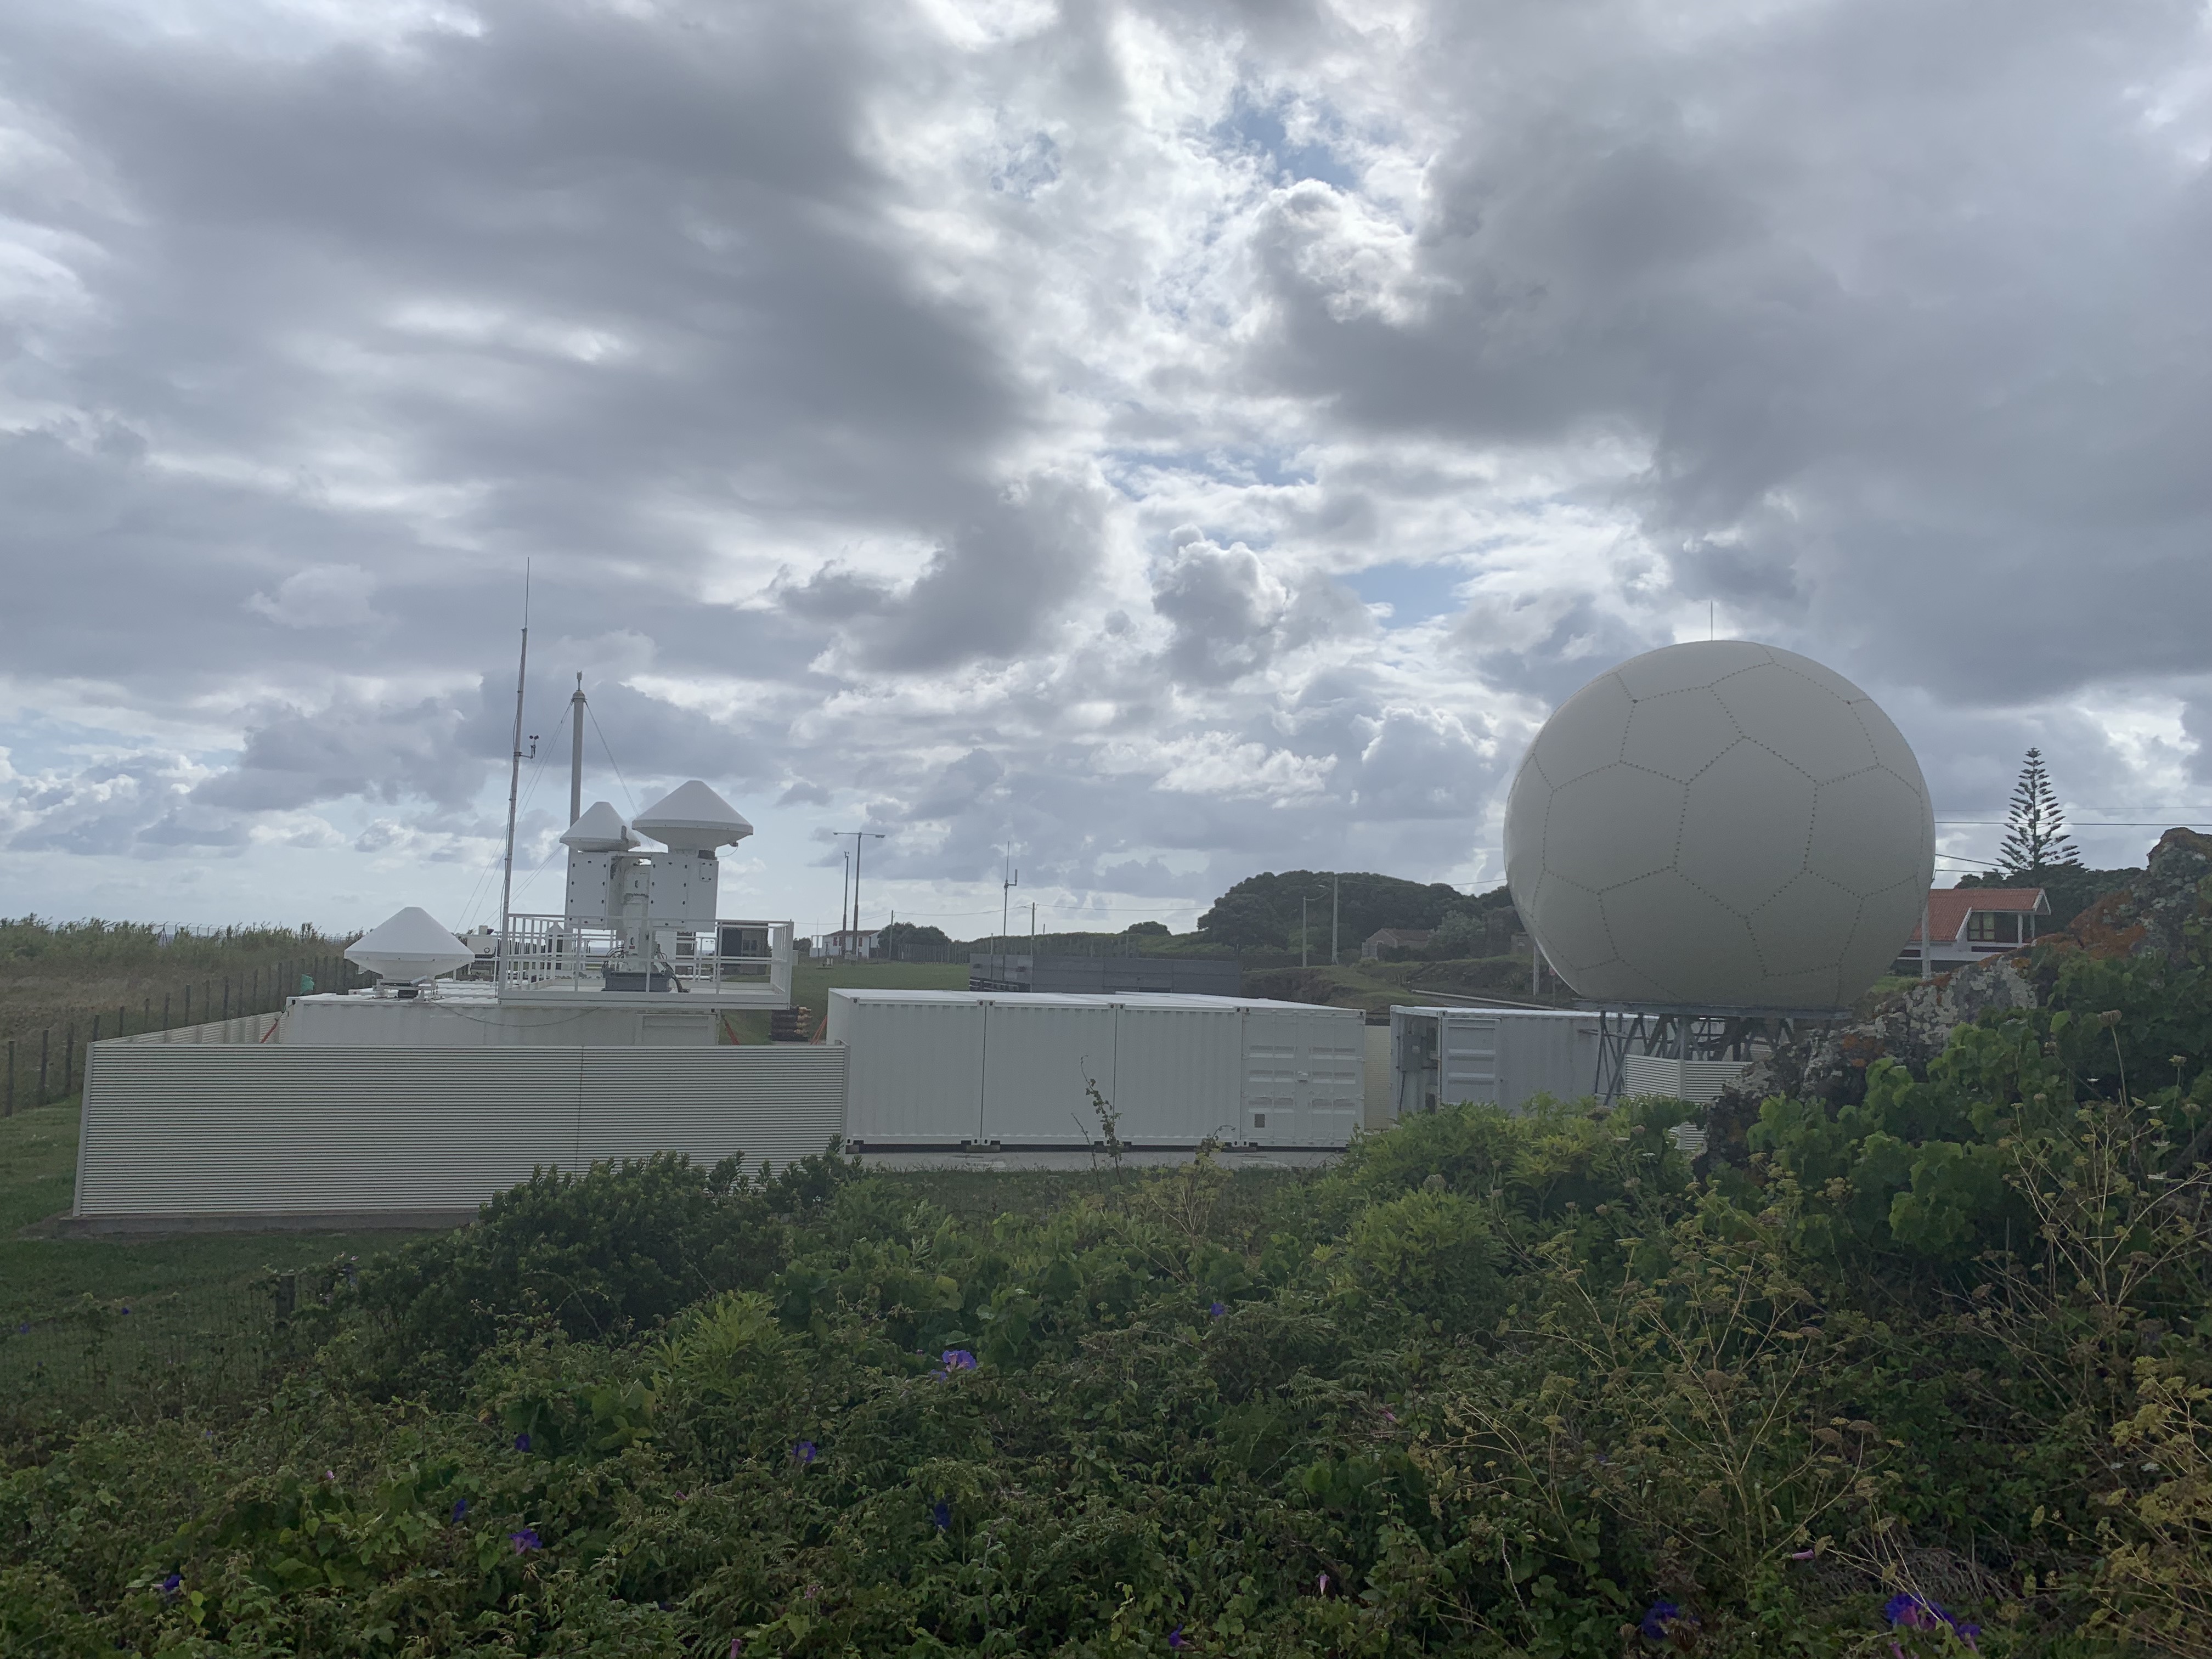 ARM’s Eastern North Atlantic (ENA) atmospheric observatory provided ground-based measurements for the Aerosol and Cloud Experiments in the Eastern North Atlantic (ACE-ENA) campaign in summer 2017 and winter 2018. ARM also deployed its Gulfstream-159 (G-1) aircraft for the campaign.